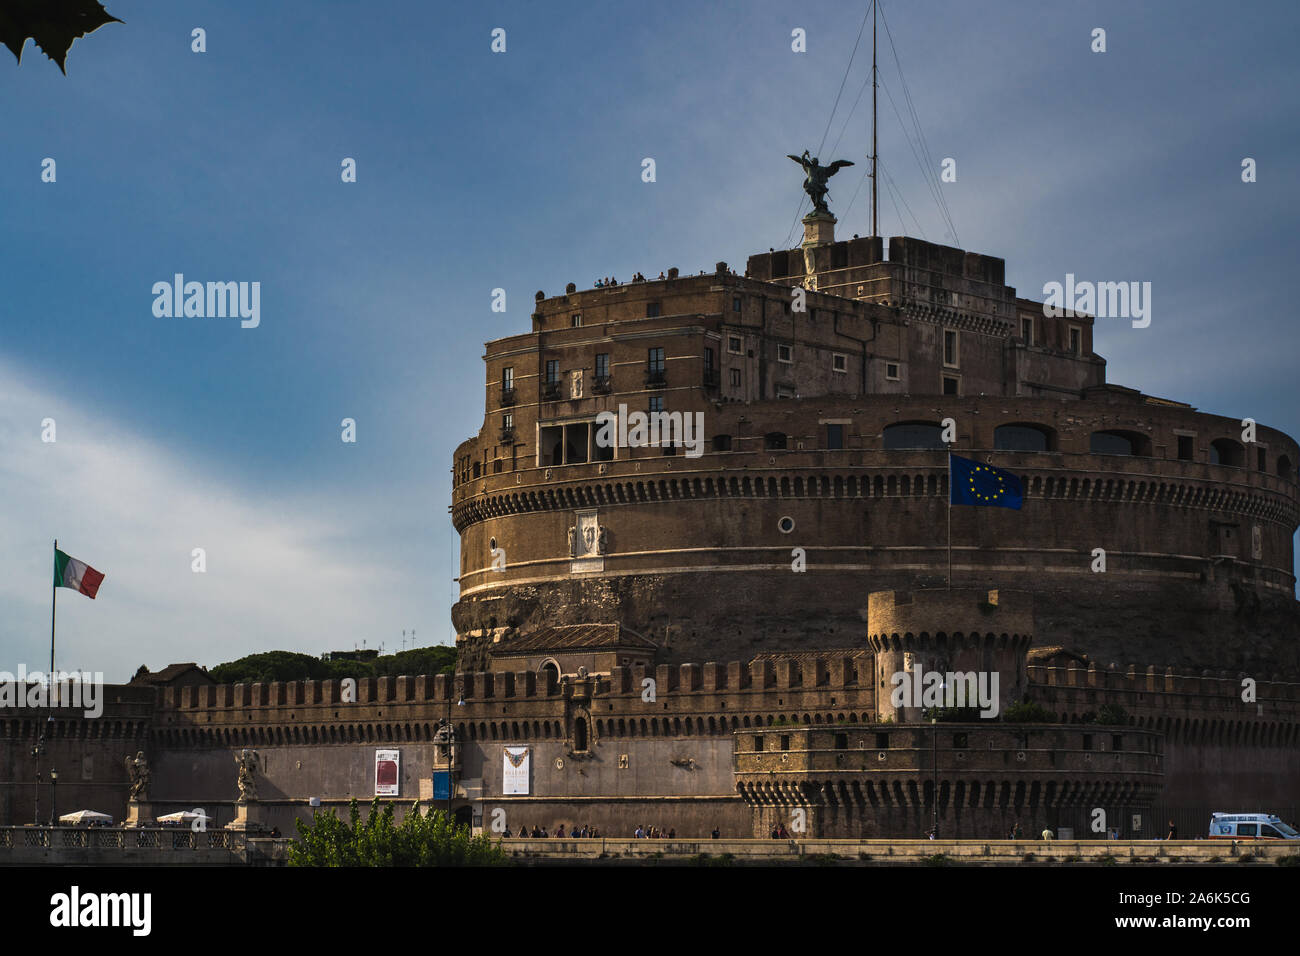 Castel Sant'Angelo in Rome. Beautiful travel photo of Castel Sant'Angelo with Italian flag and EU flag with no people. Stock Photo